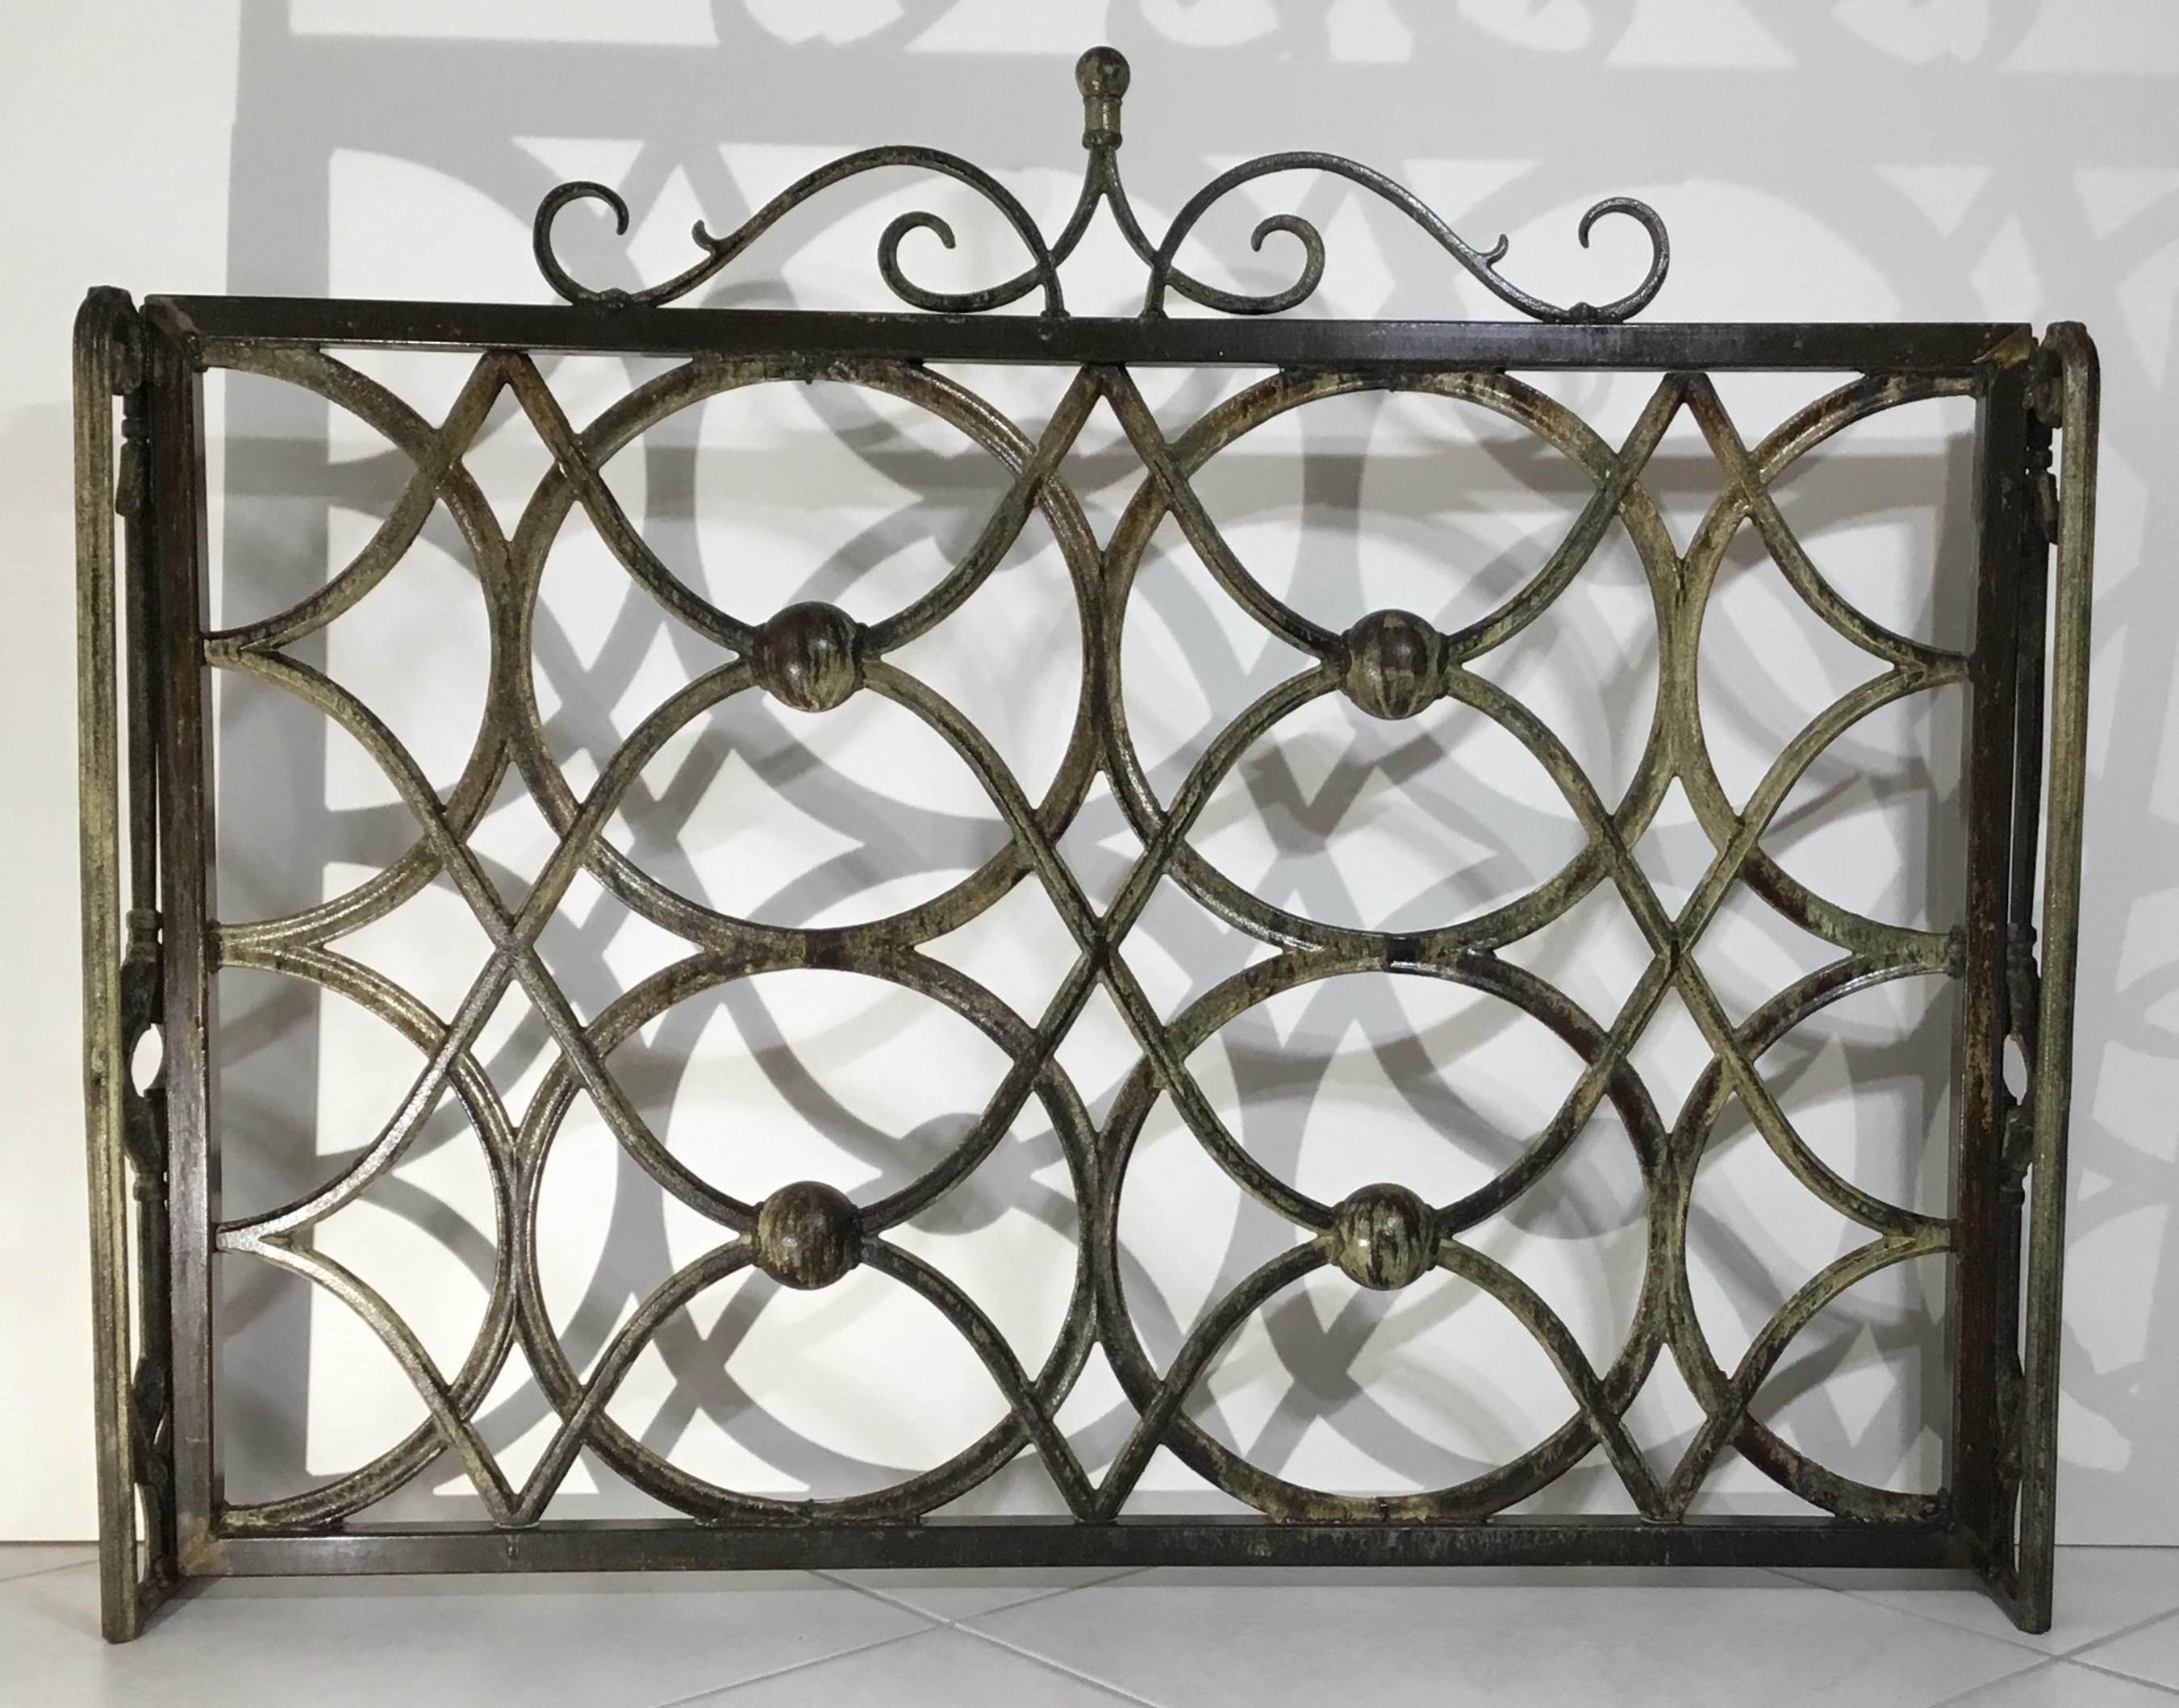 Beautiful fireplace screen made of cast iron with artistic circular motifs all around, treated and sealed for rust, great object of art for display.